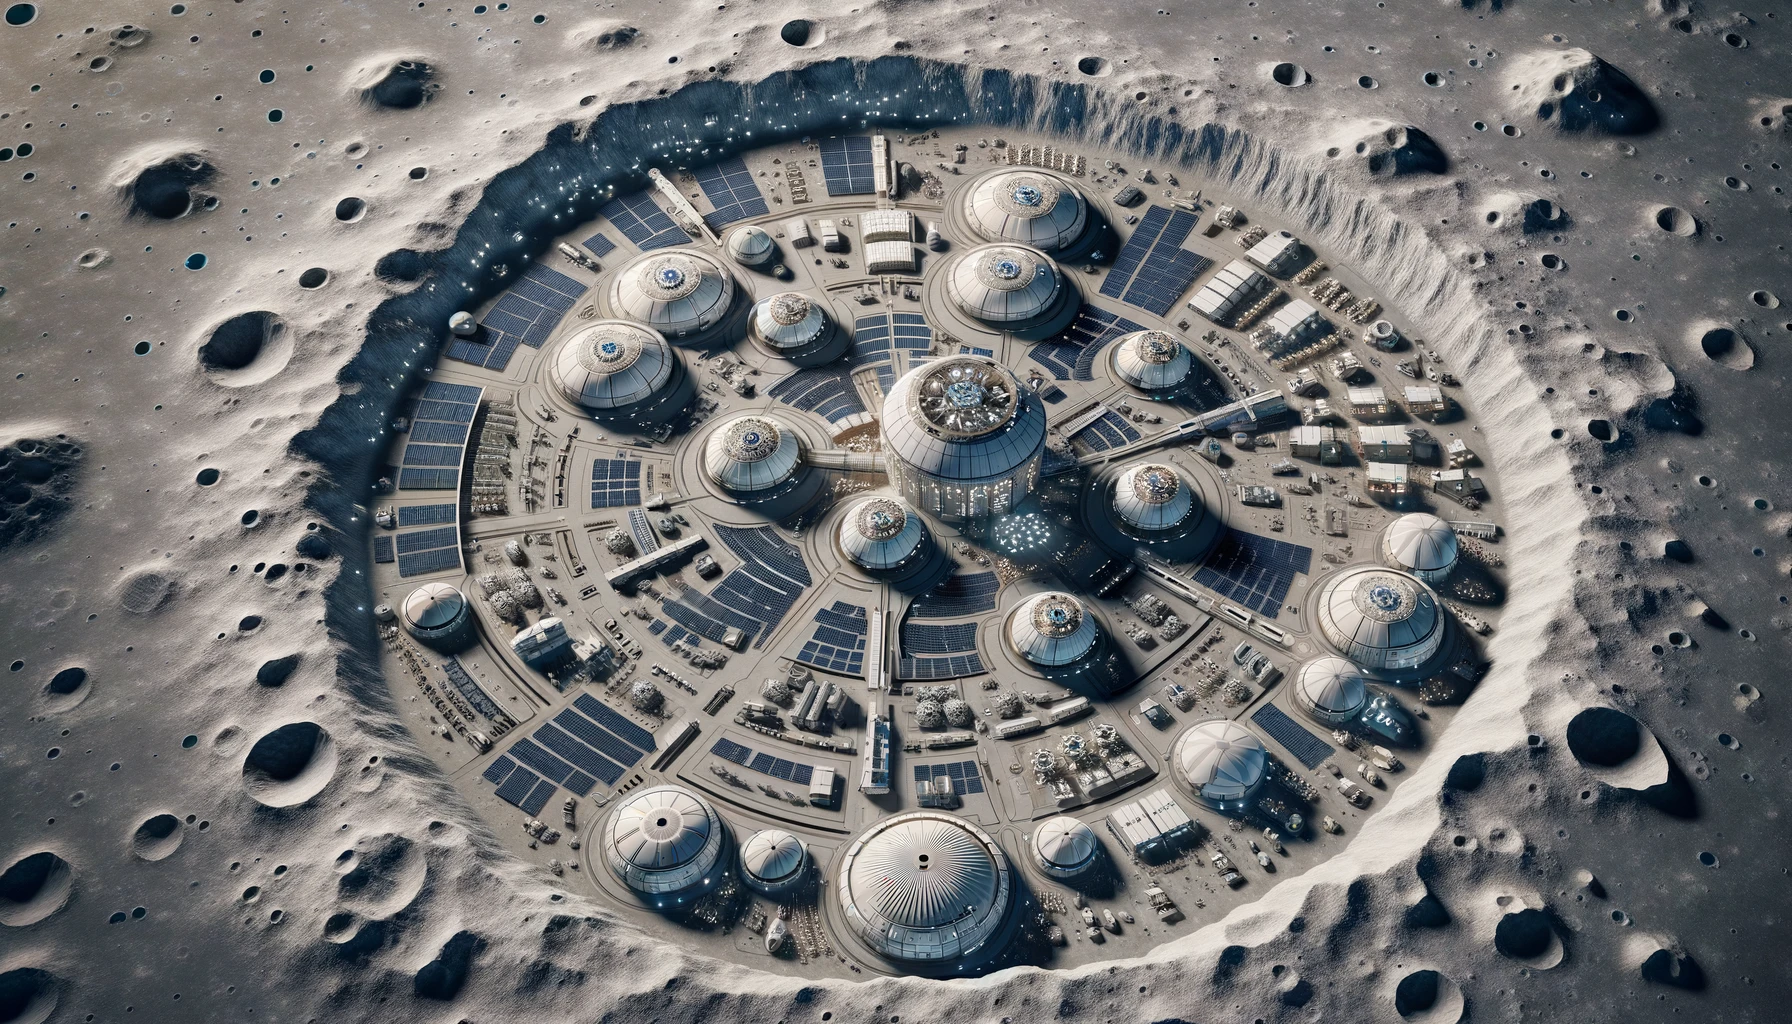 A sprawling city on the surface of the moon